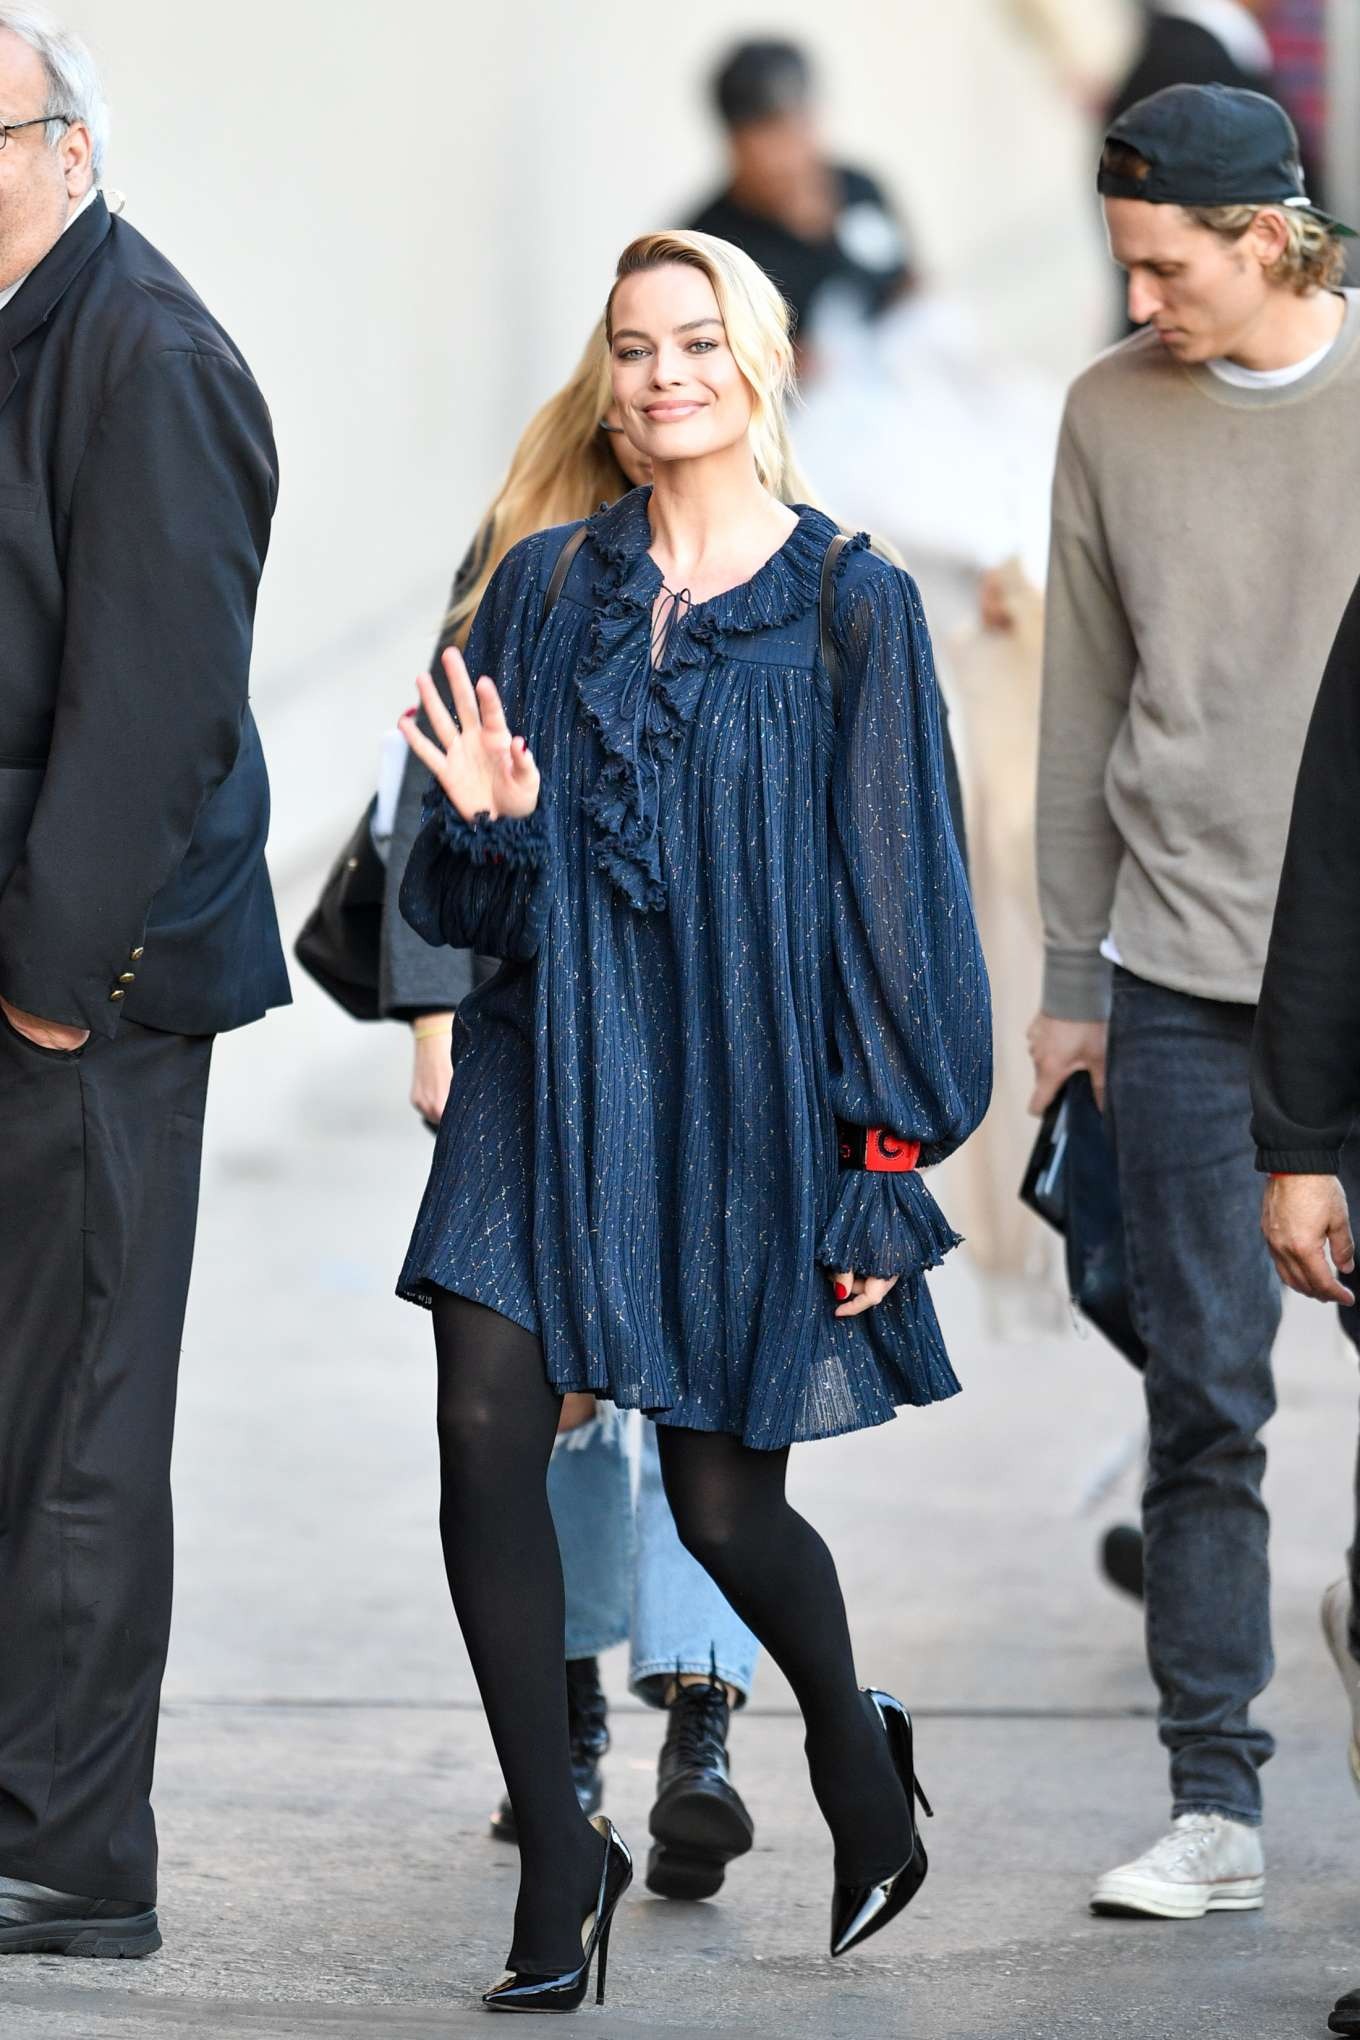 Margot Robbie Wowed in a Flare Blue Dress While Arriving At the Jimmy ...